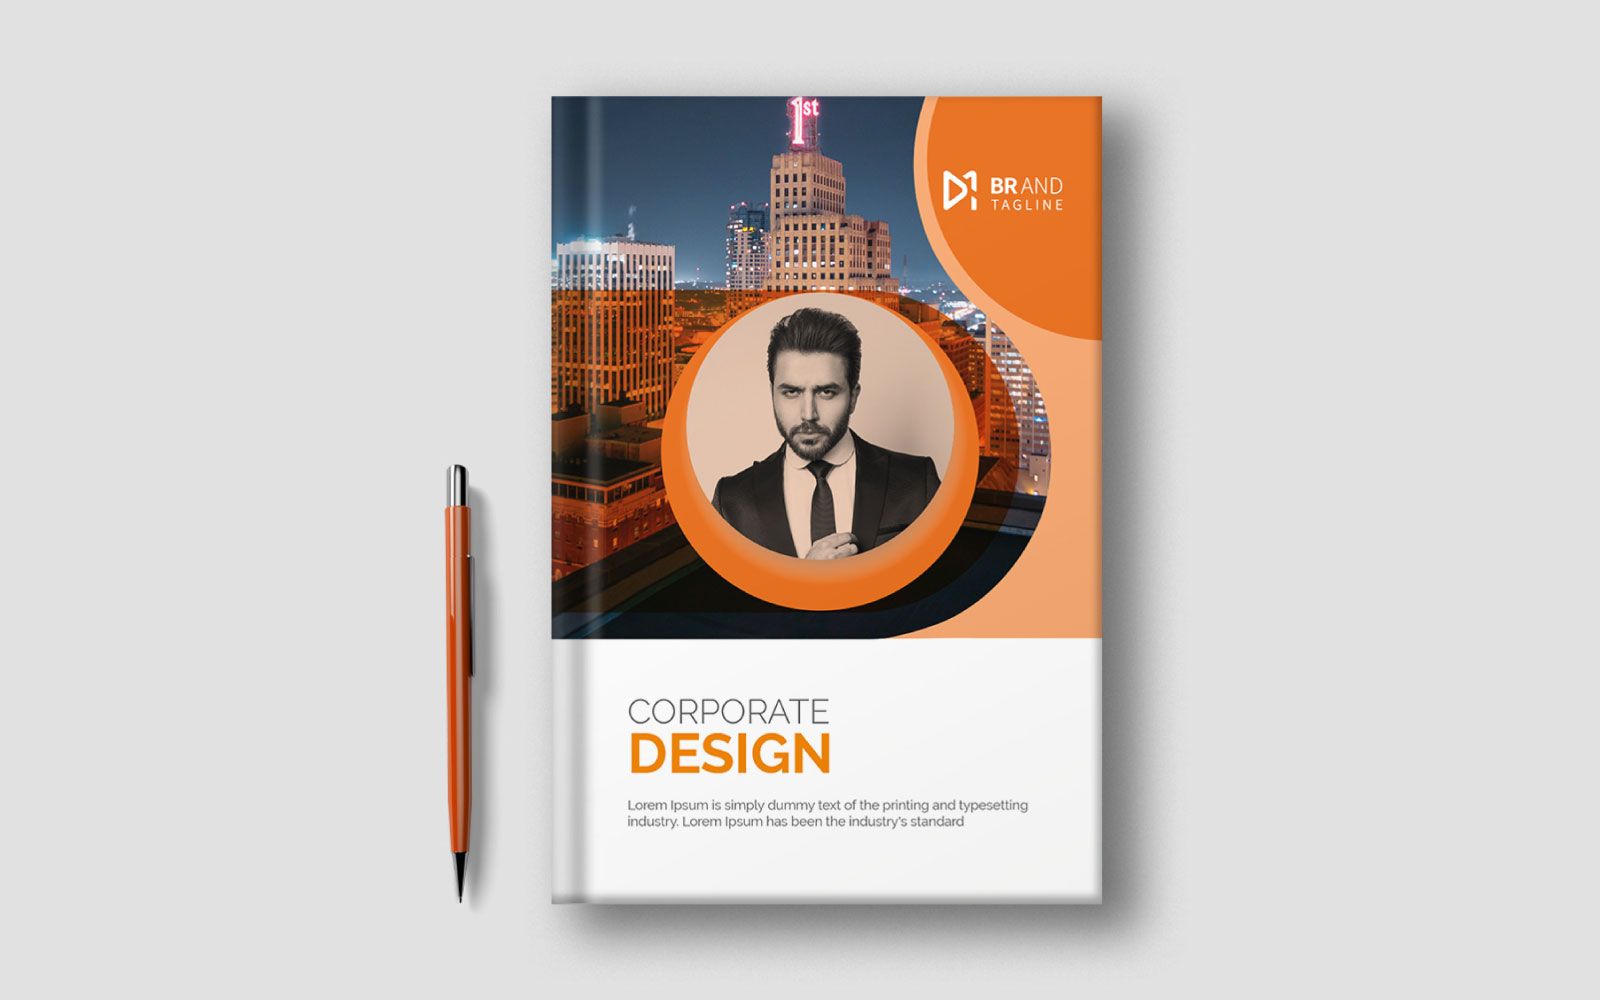 Creative and modern book cover design template